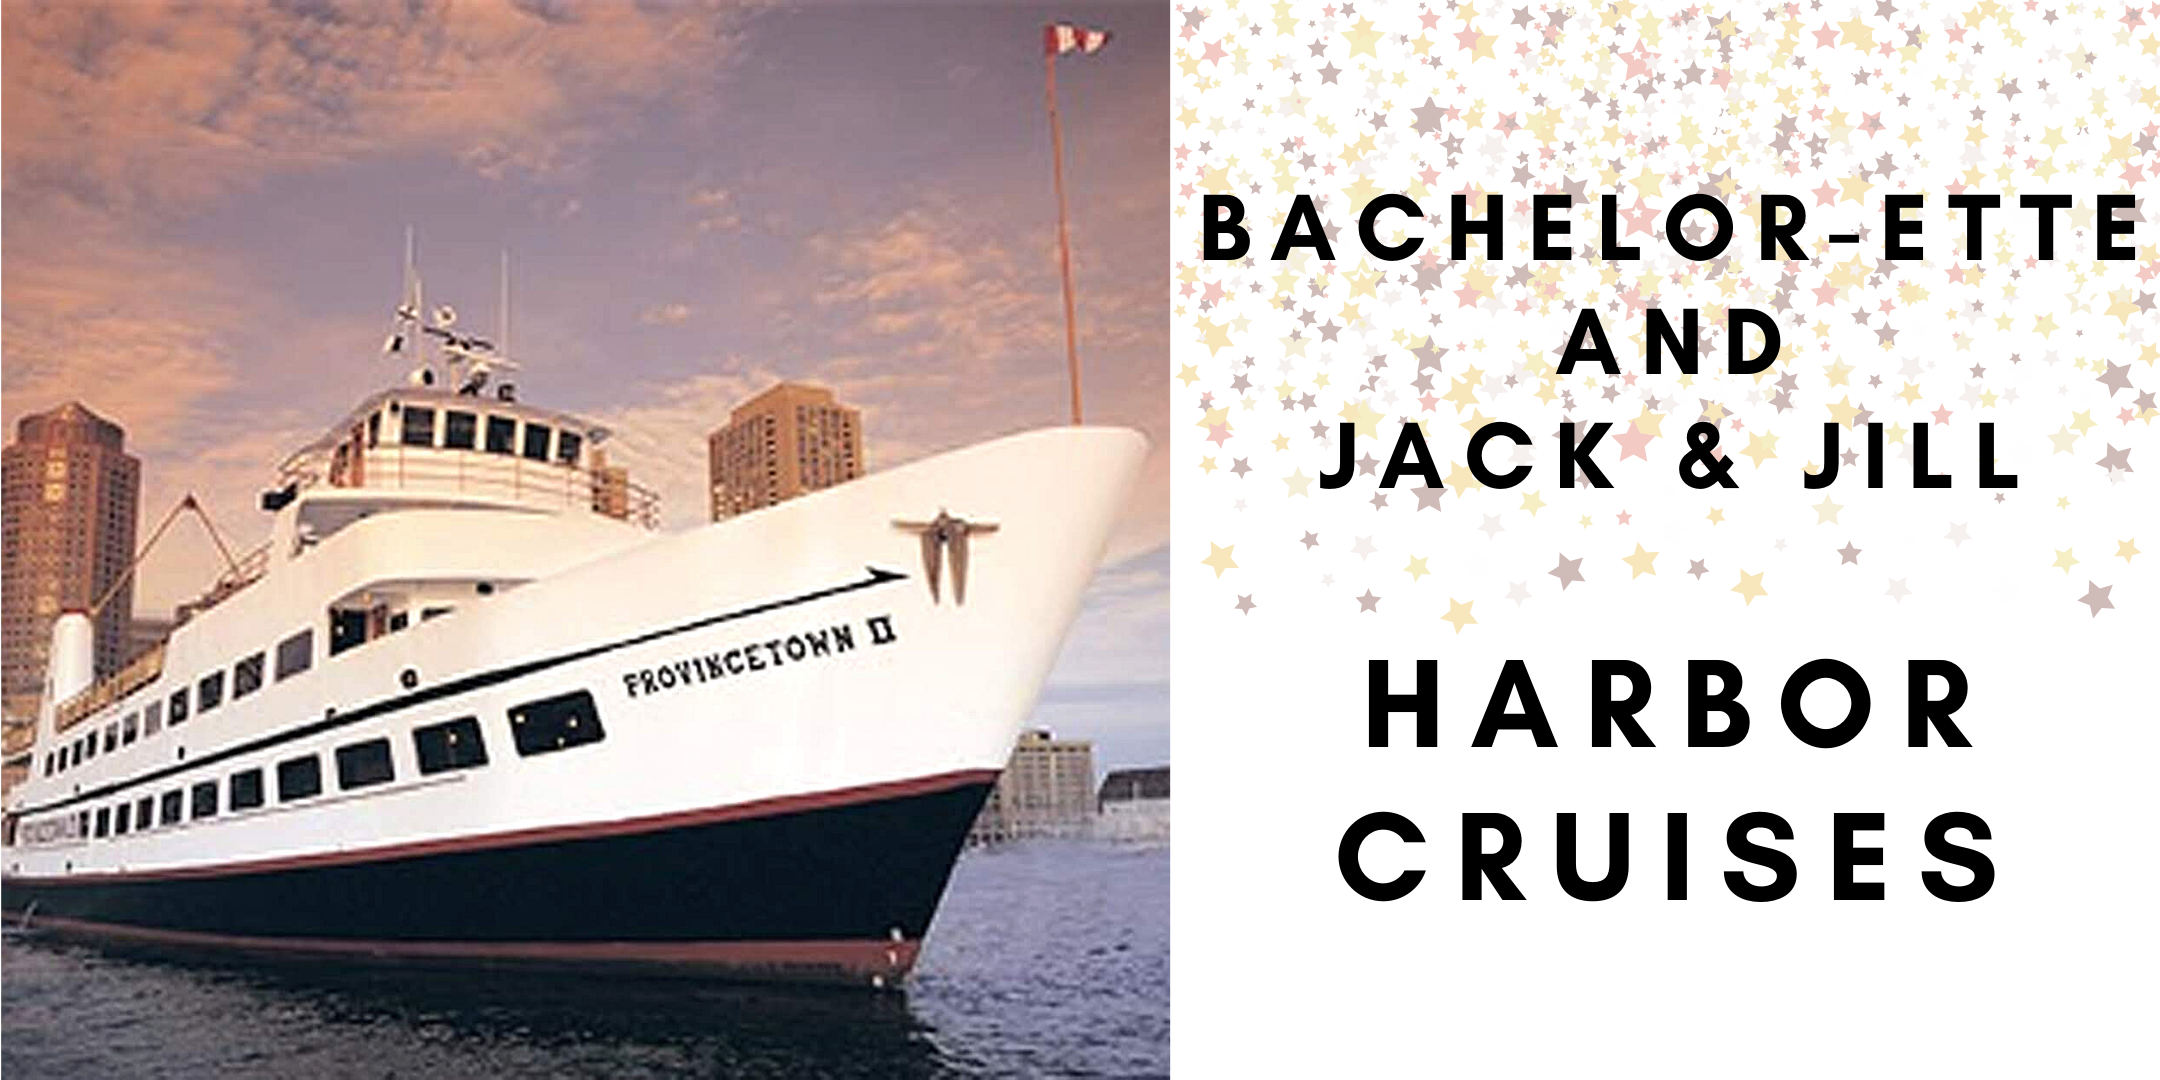 Bachelorette or Jack & Jill Party Cruises: Best Bride Tribe Cruises